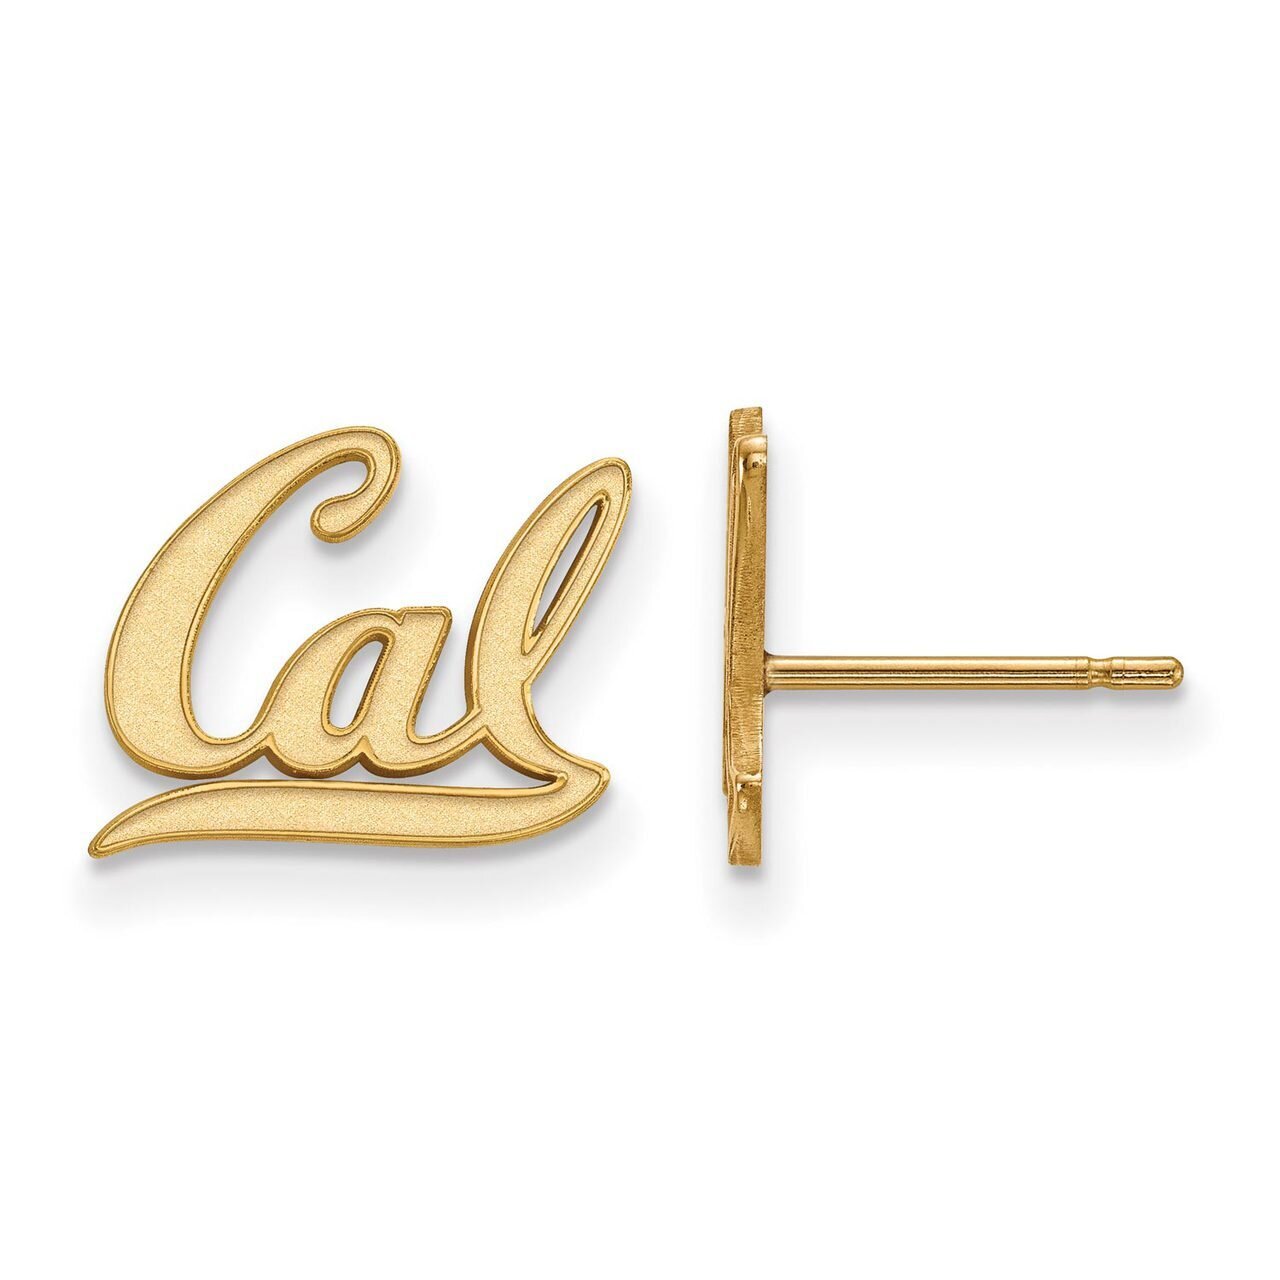 University of California Berkeley x-Small Post Earring Gold-plated Silver GP007UCB